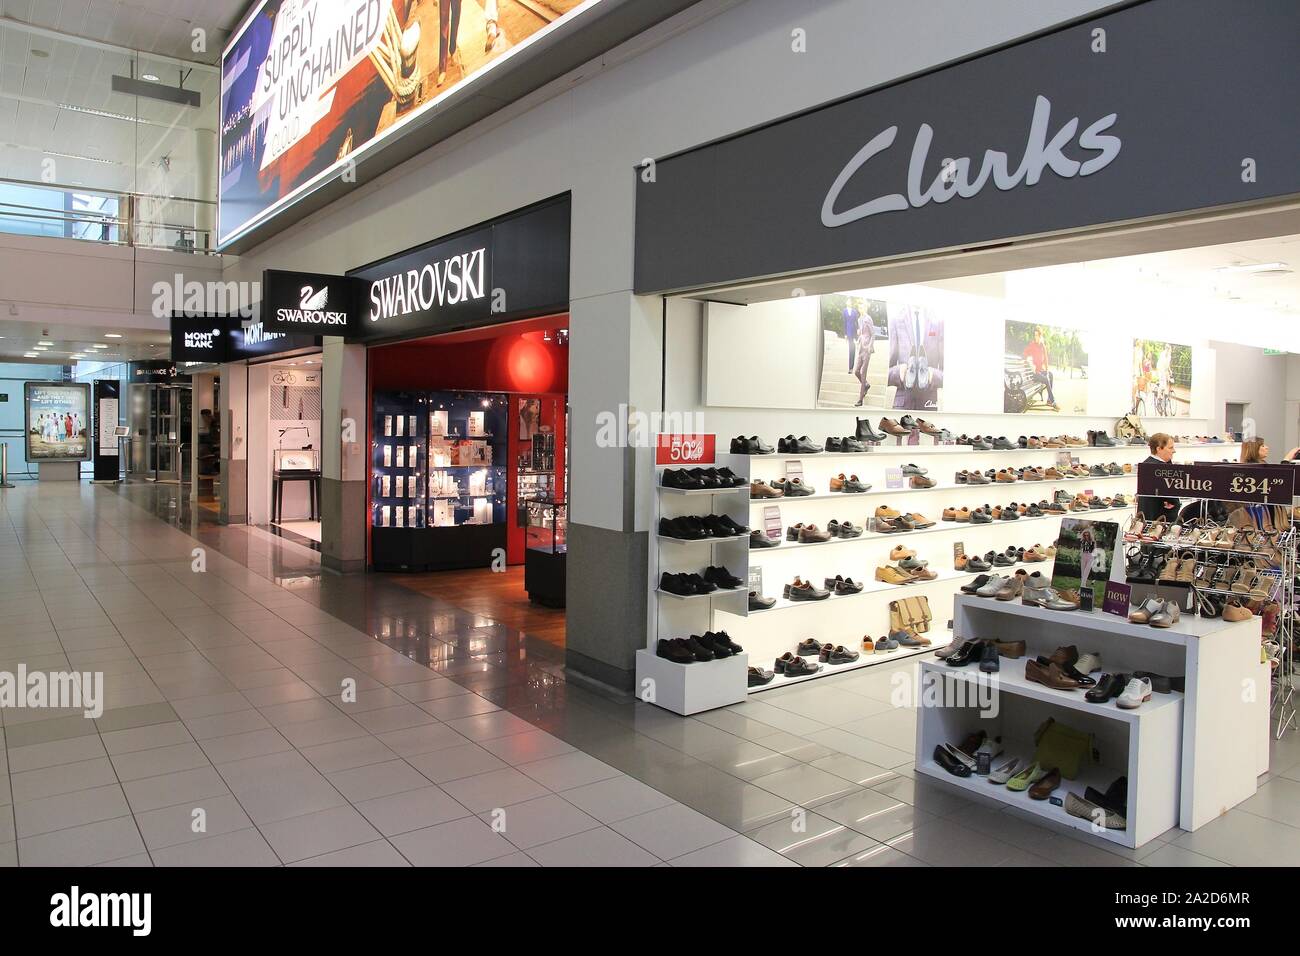 clarks london stores